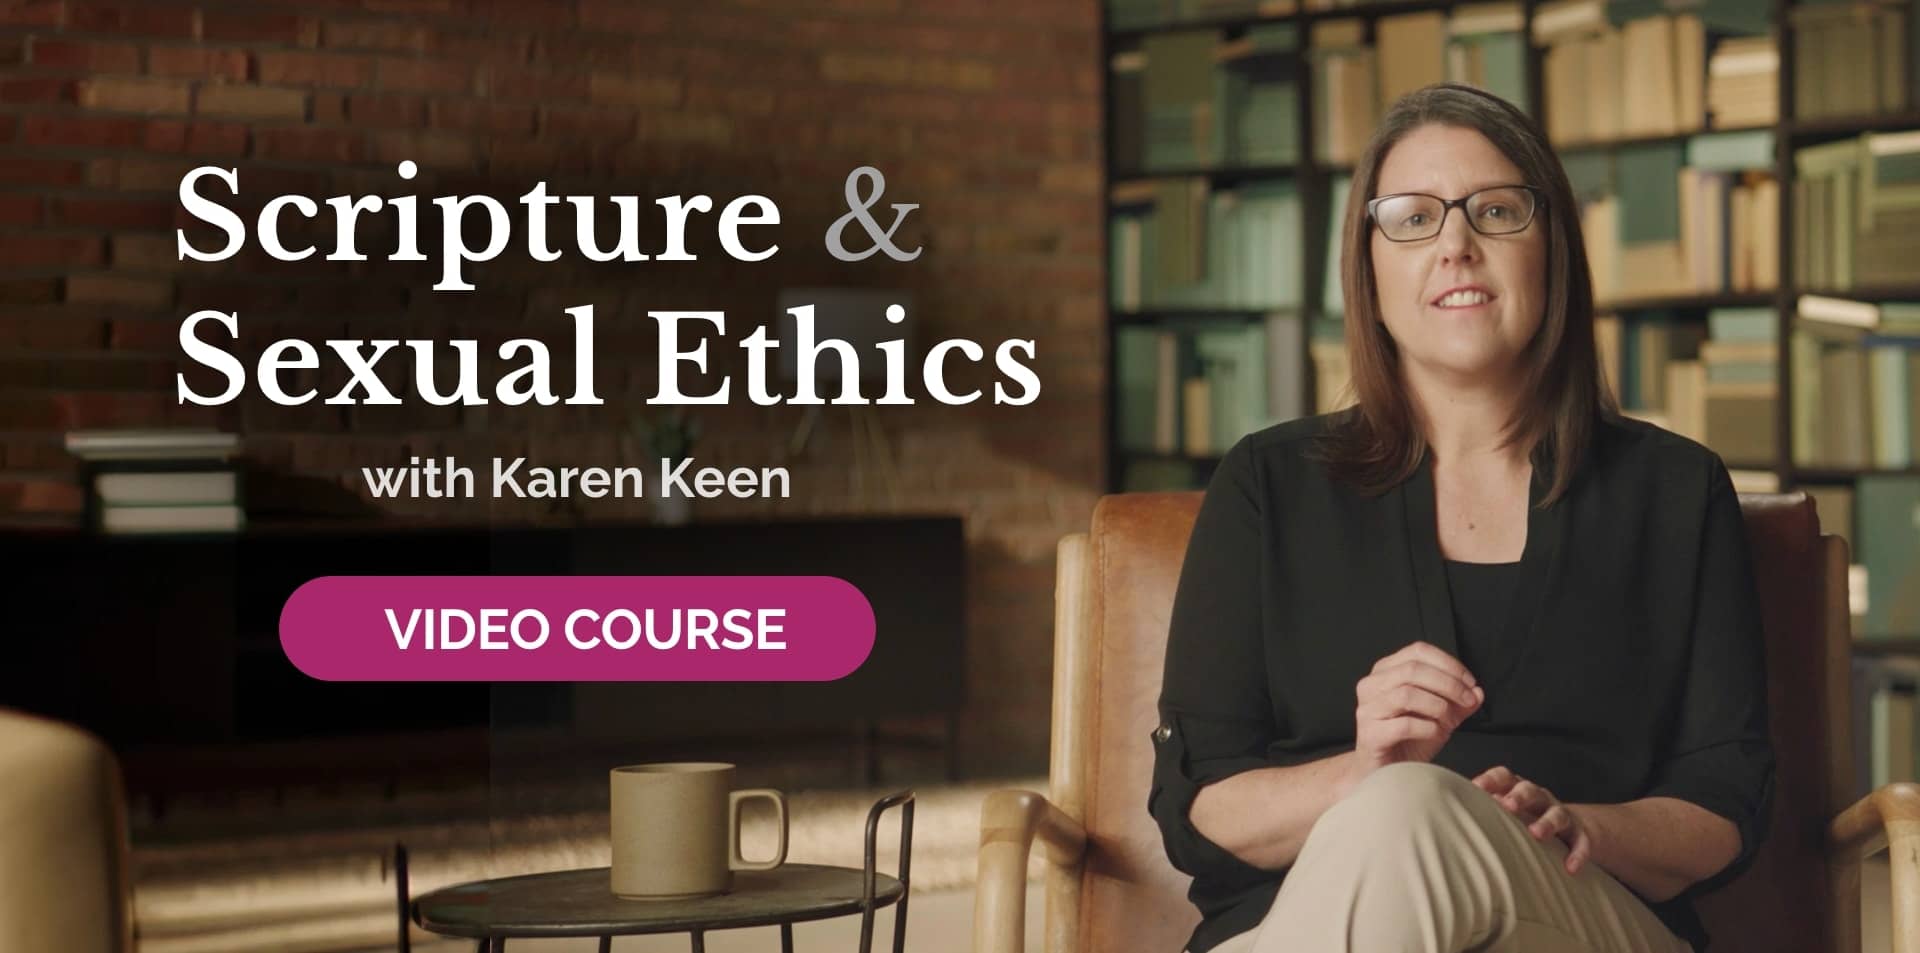 Scripture and Sexual Ethics - Video Course by Karen Keen